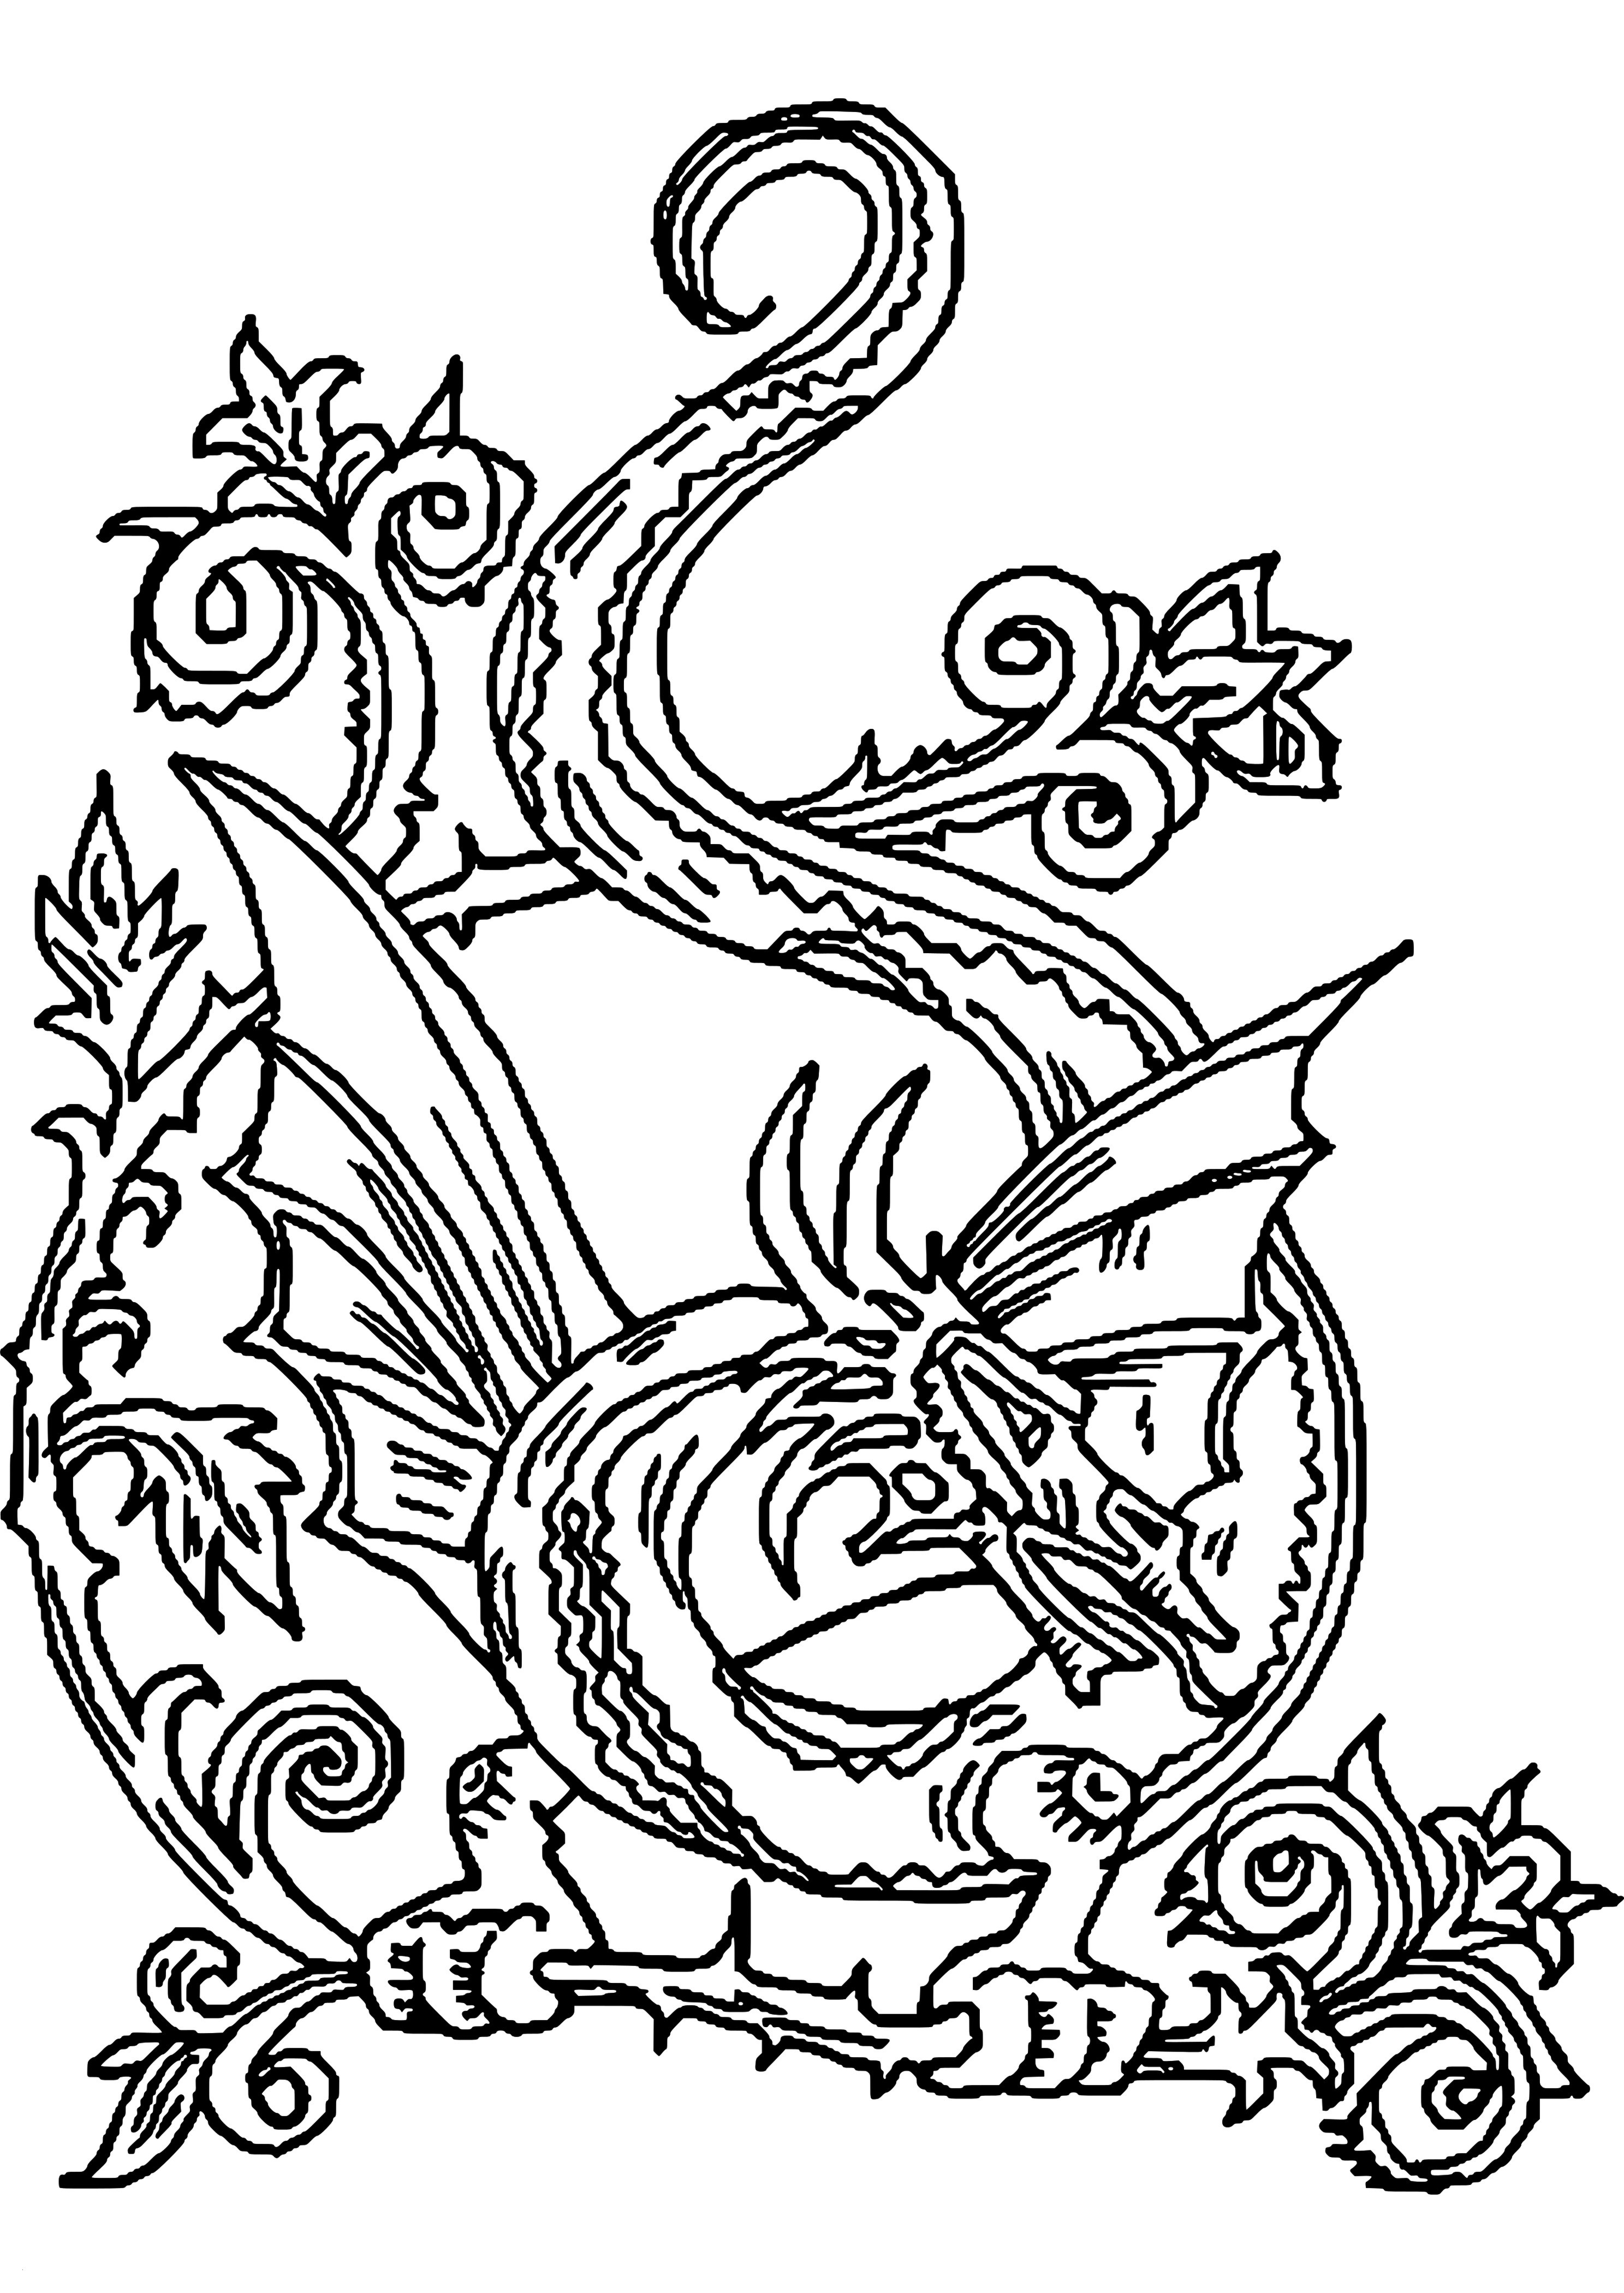 New Free Printable Adult Coloring Pages Dragons - HD Wallpaper 